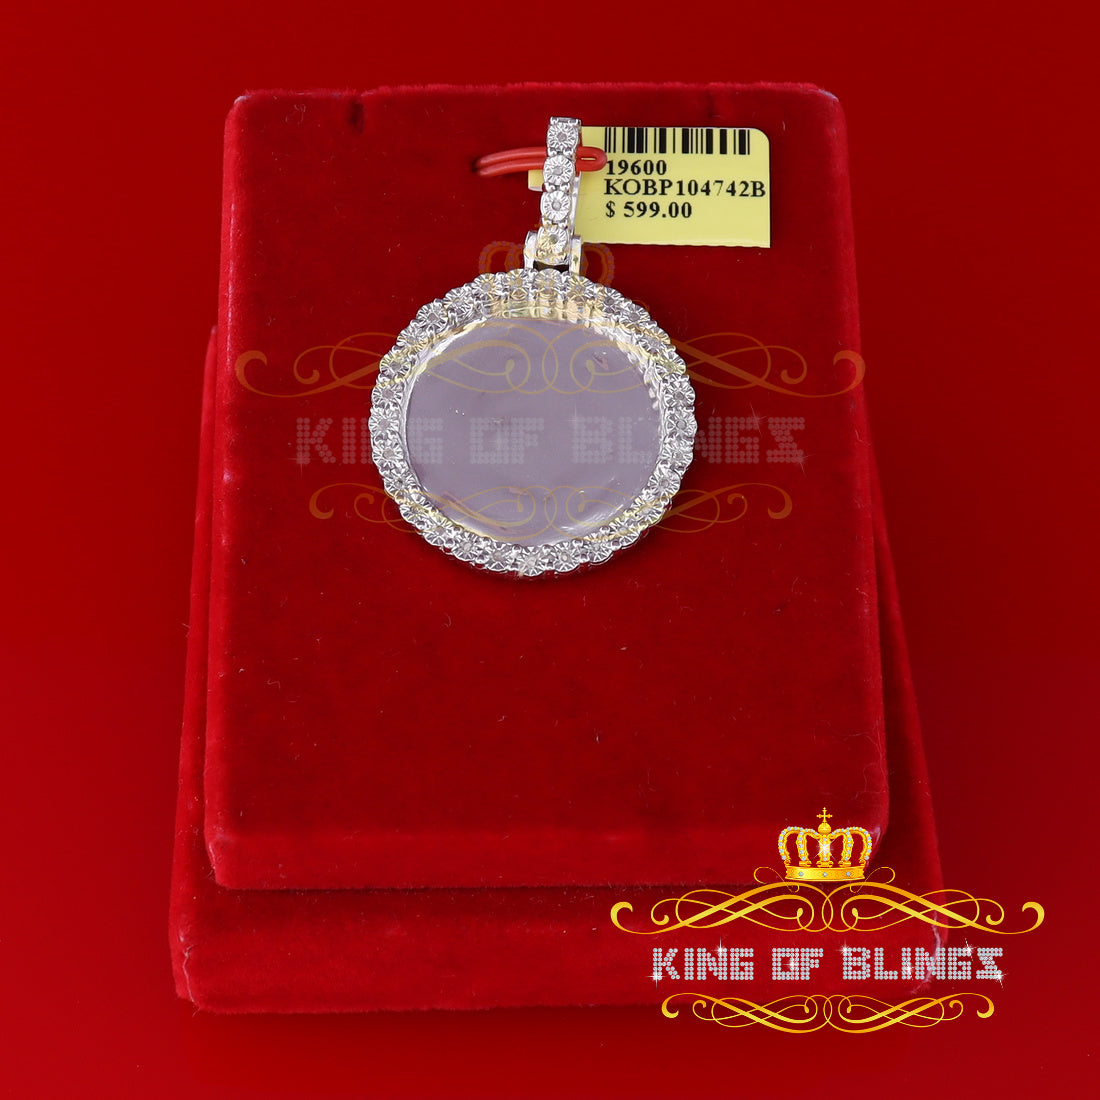 King Of Bling's Real 0.50ct Diamond 925 Sterling Silver 1.25" PICTURE Fashion White Pendant KING OF BLINGS